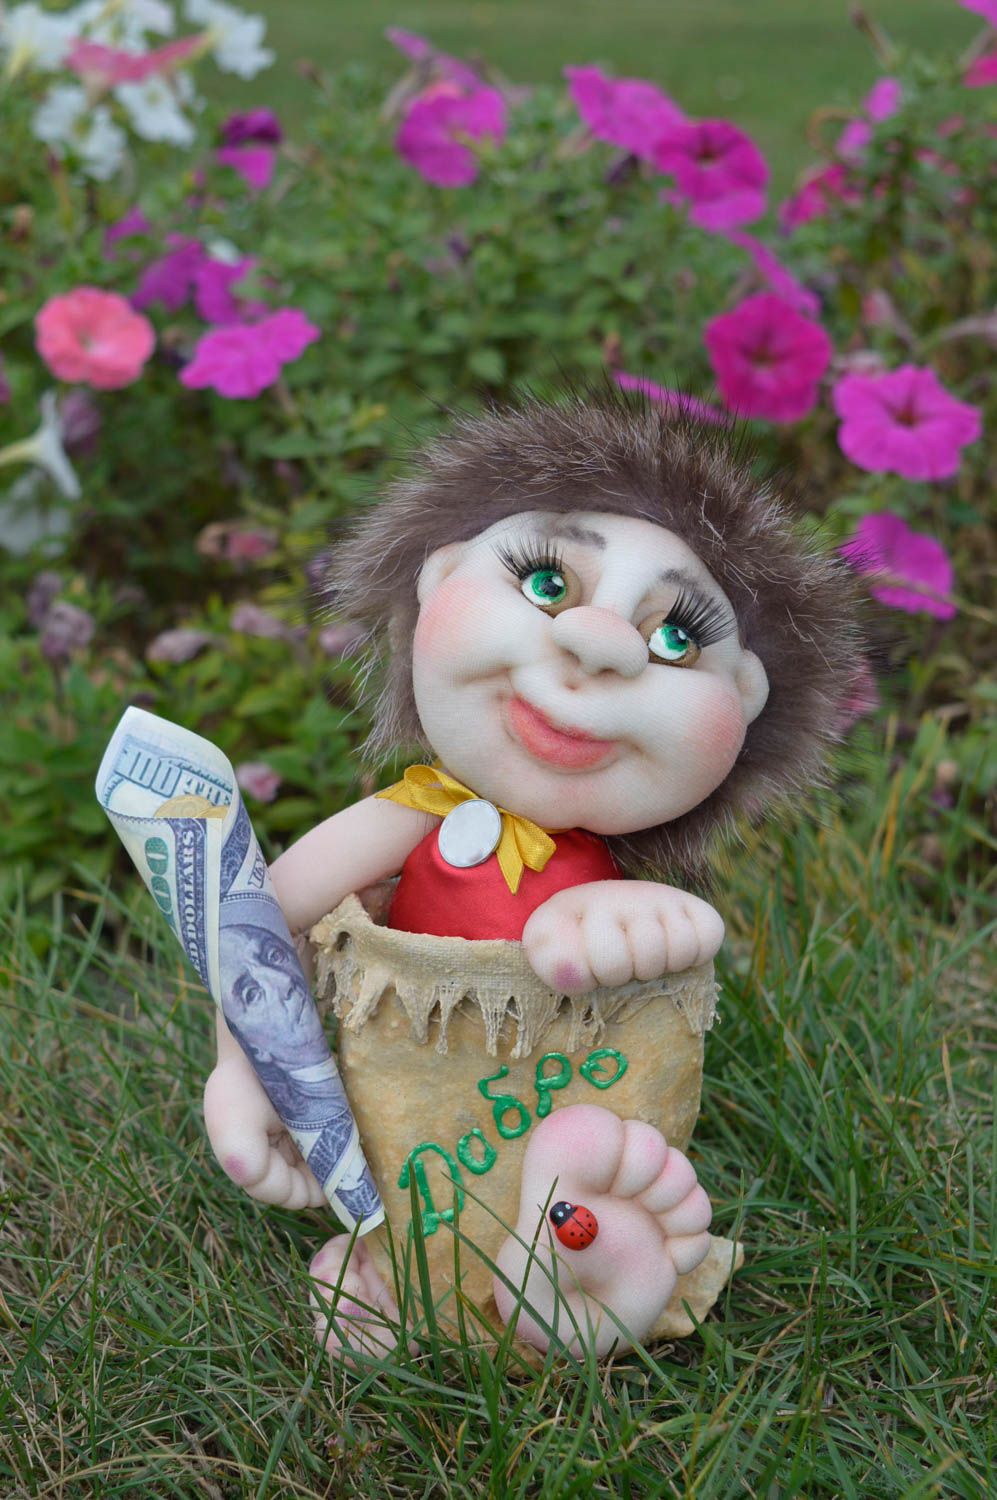 Design doll handmade toy souvenir fabric toy rag doll with dollar for good luck photo 1